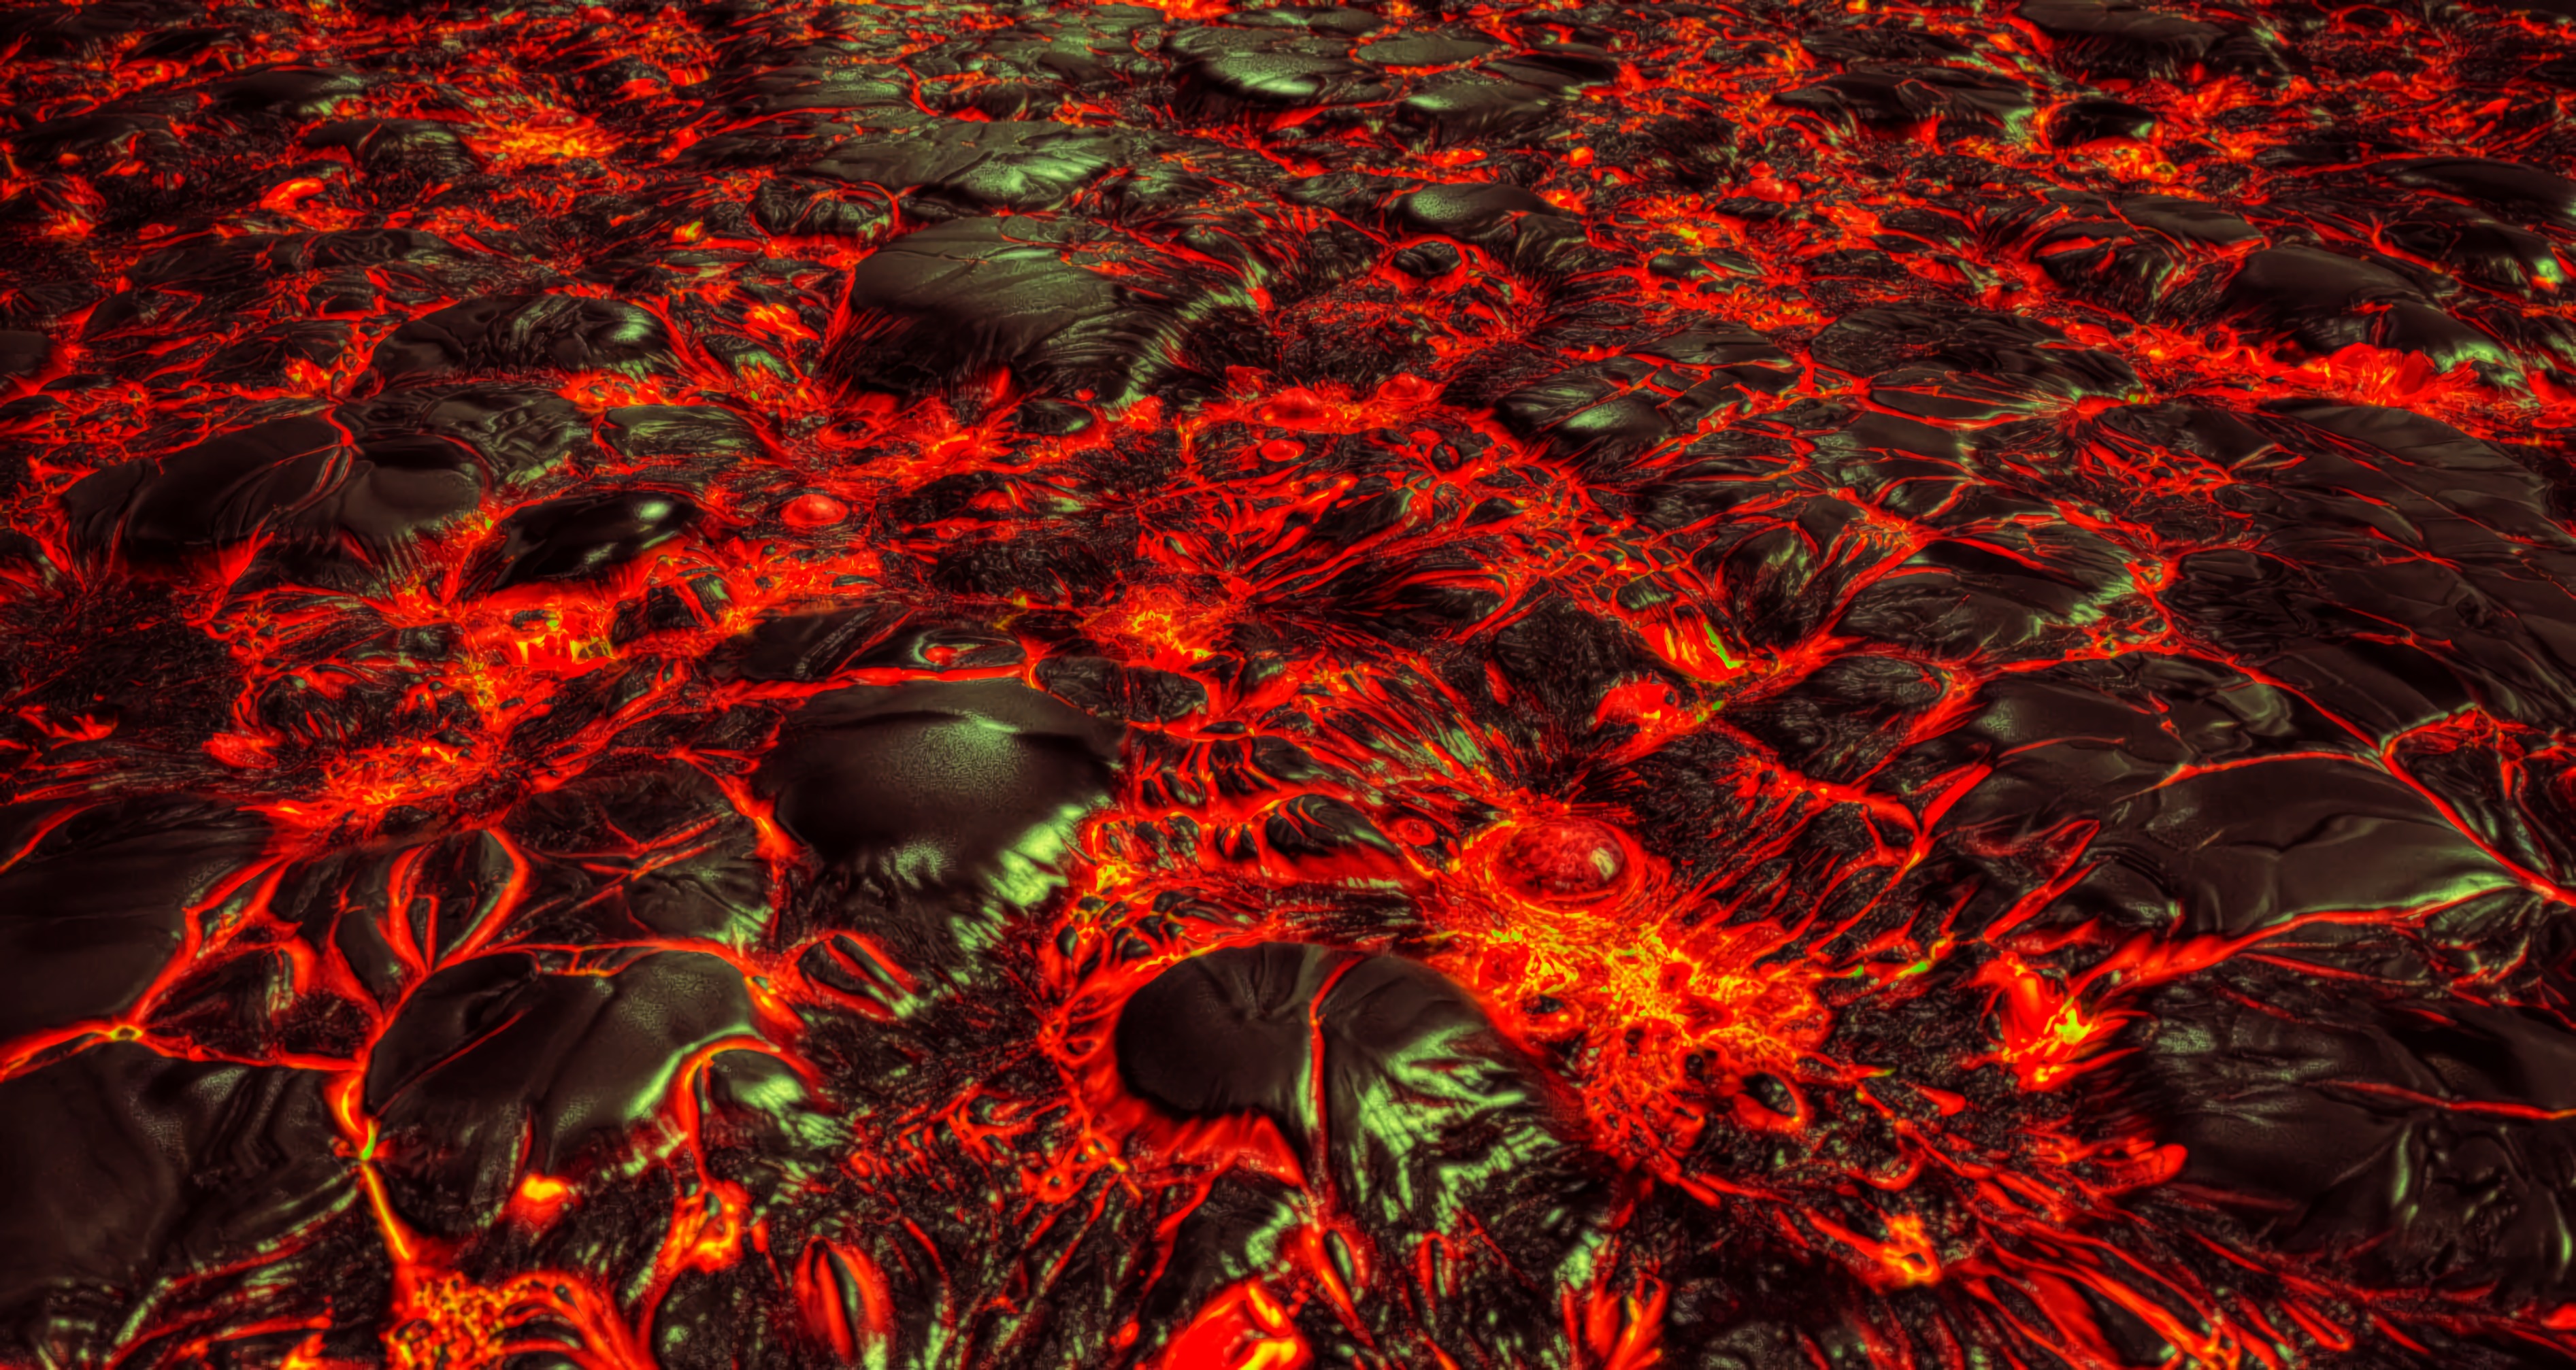 116841 download wallpaper 3d, texture, lava, fiery, volcanic screensavers and pictures for free